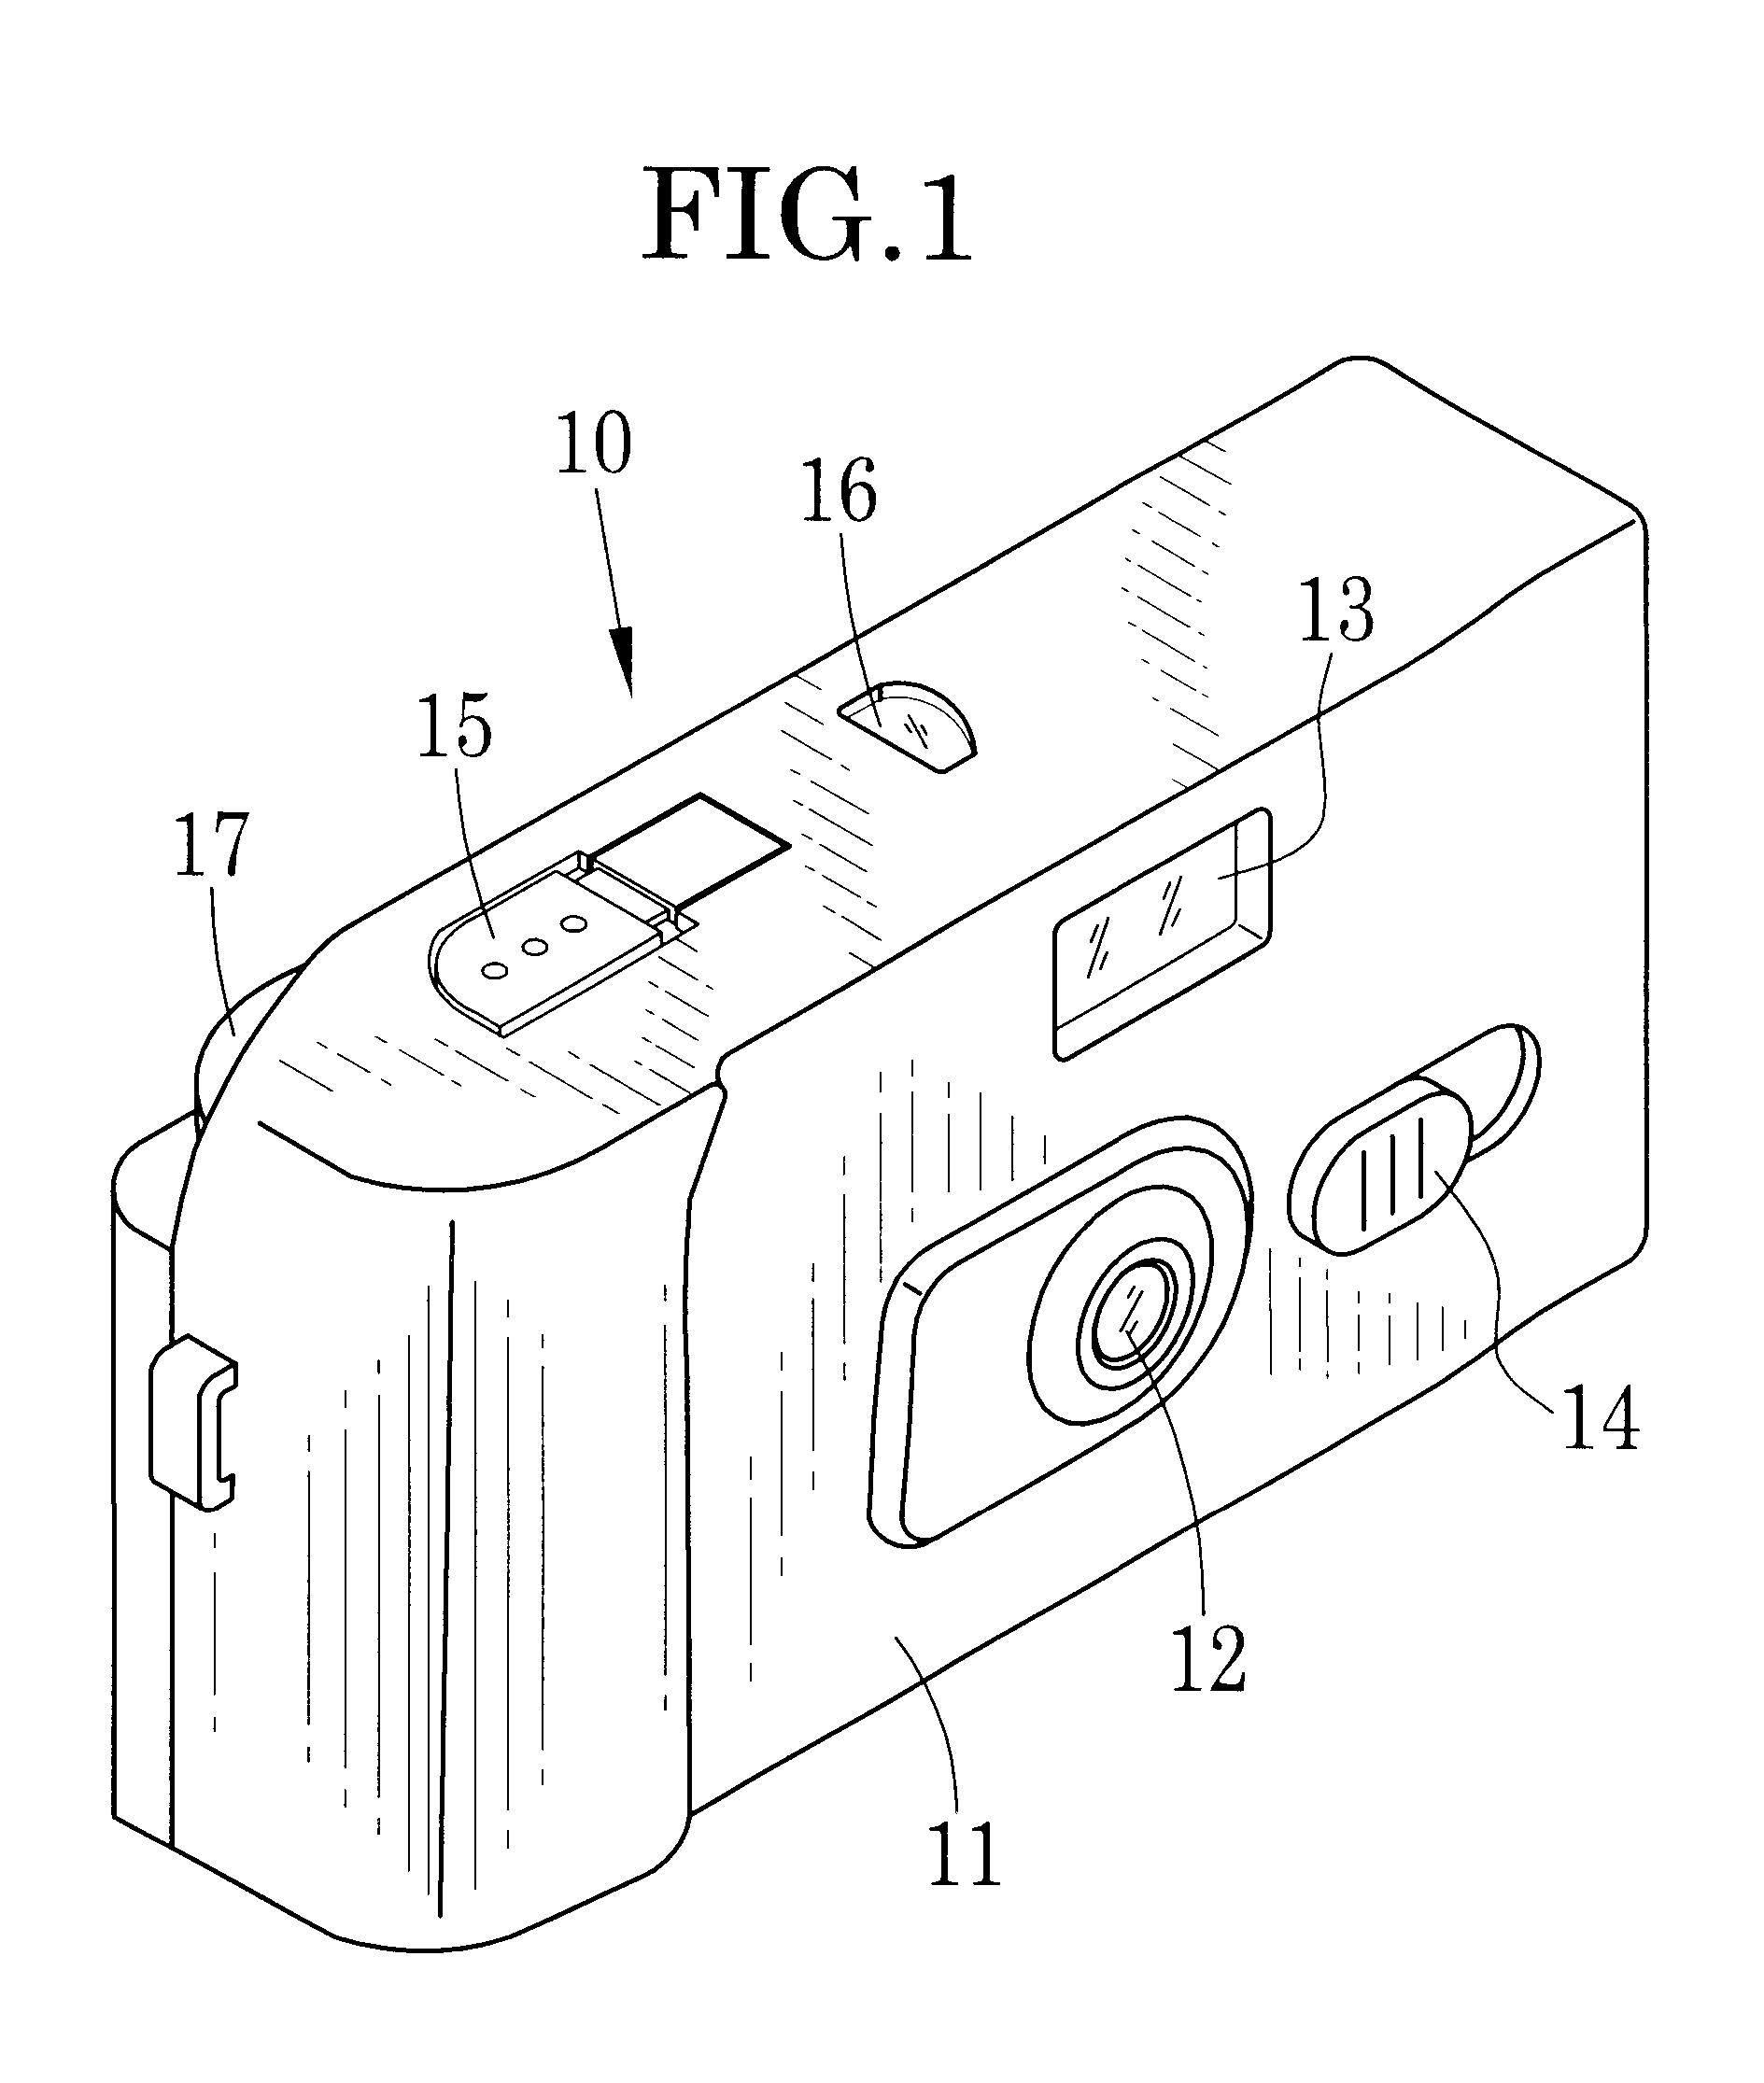 Lens-fitted photo film unit capable of changing over aperture stop